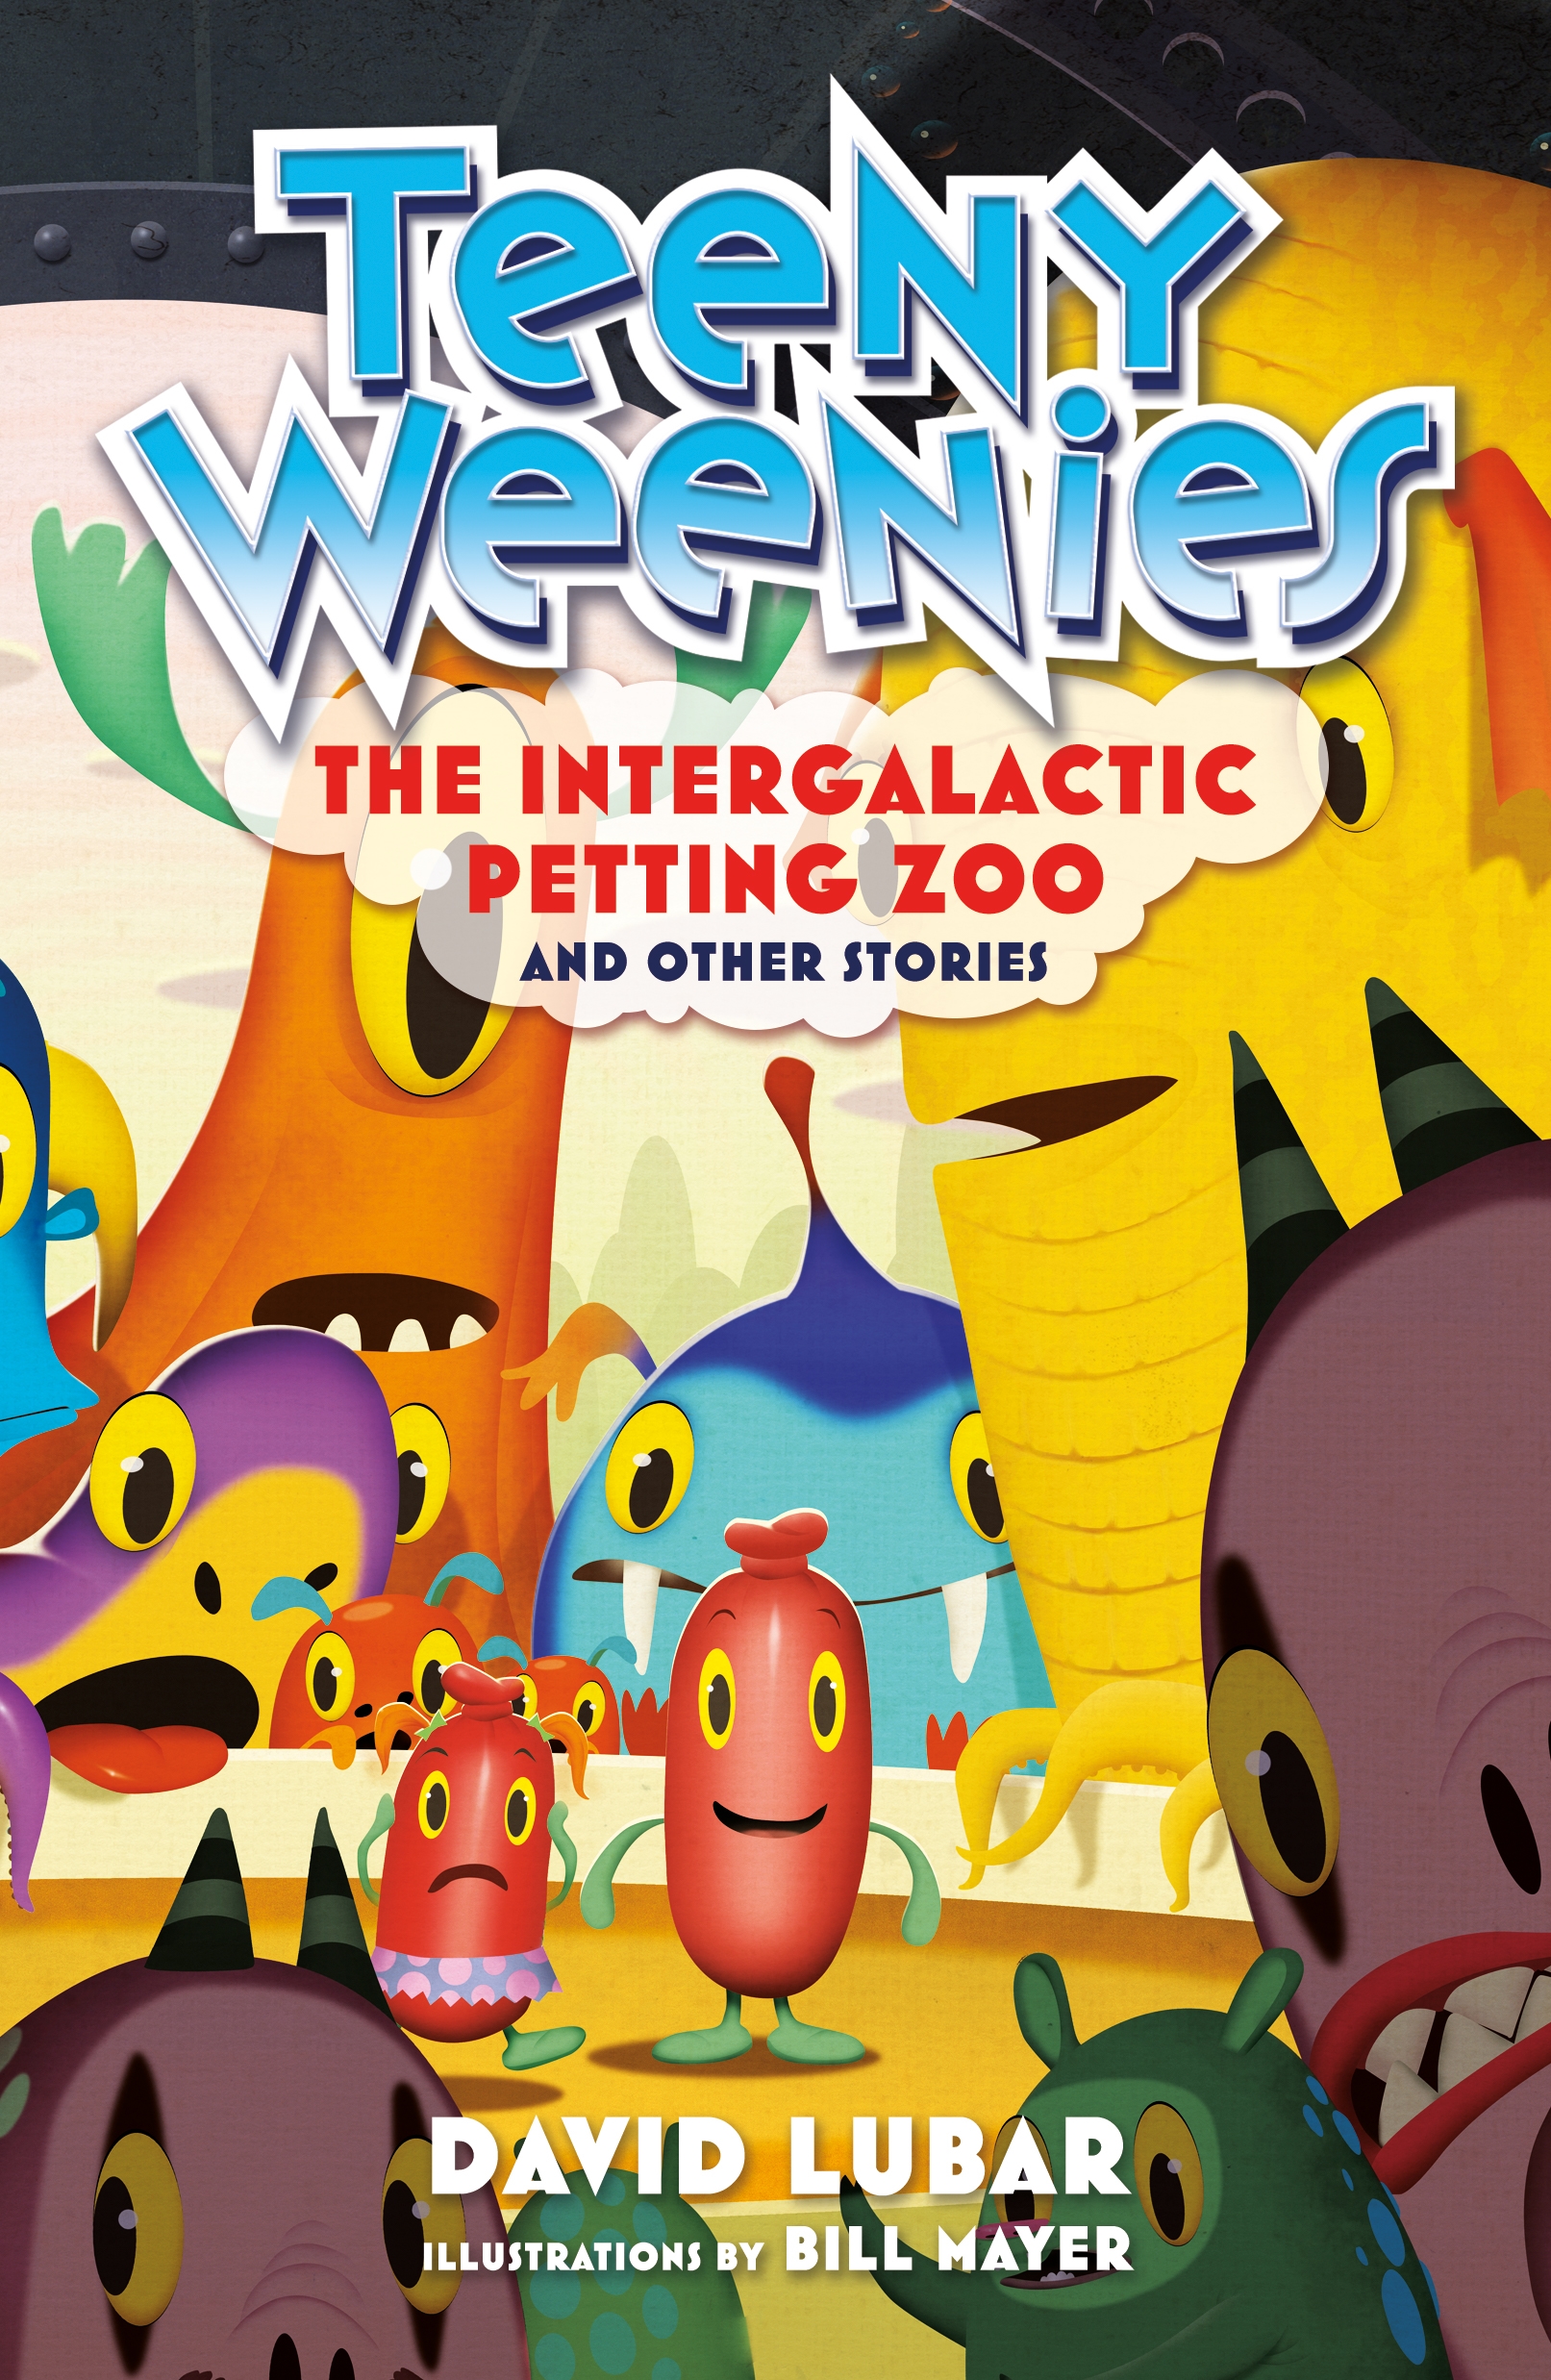 Teeny Weenies: The Intergalactic Petting Zoo : And Other Stories by David Lubar, Bill Mayer